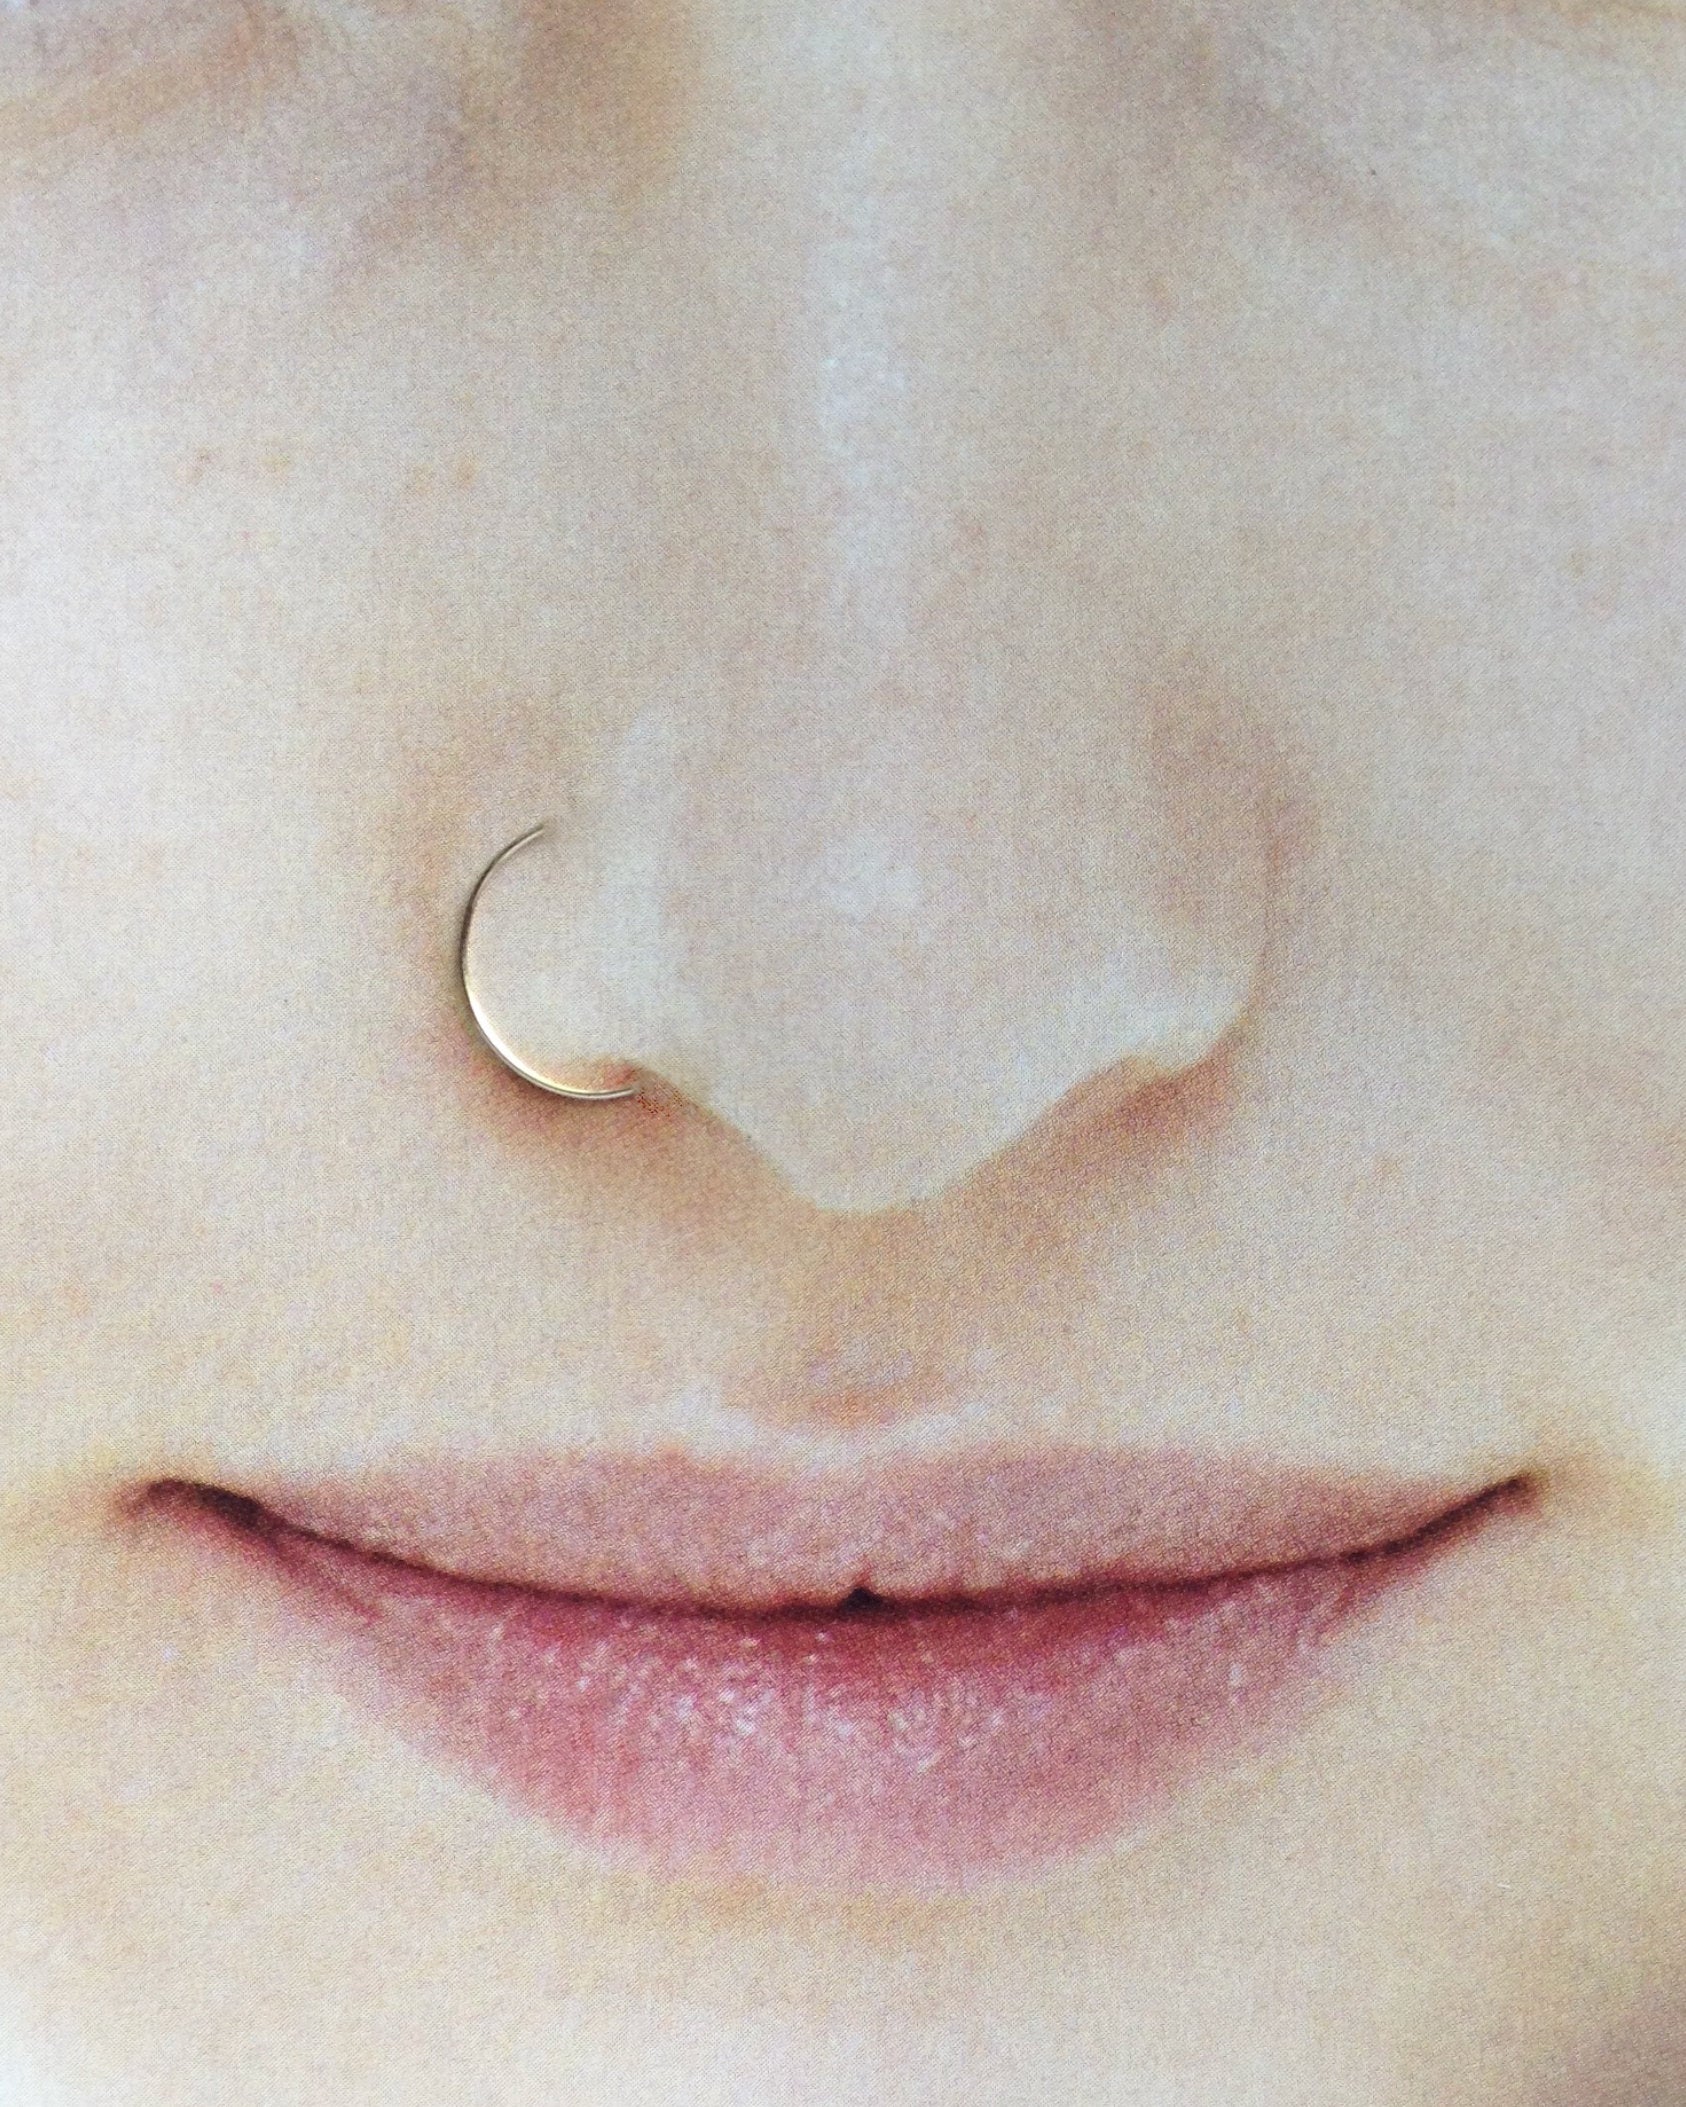 Tiny Nose Earring, Small Nose Stud, Silver Sterling Nose Earring, Gold Nose  Ring, Star Nose Stud, Hand Made, Tiny Nose Earring, Piercing, - Etsy | Nose  earrings, Tiny nose studs, Nose stud